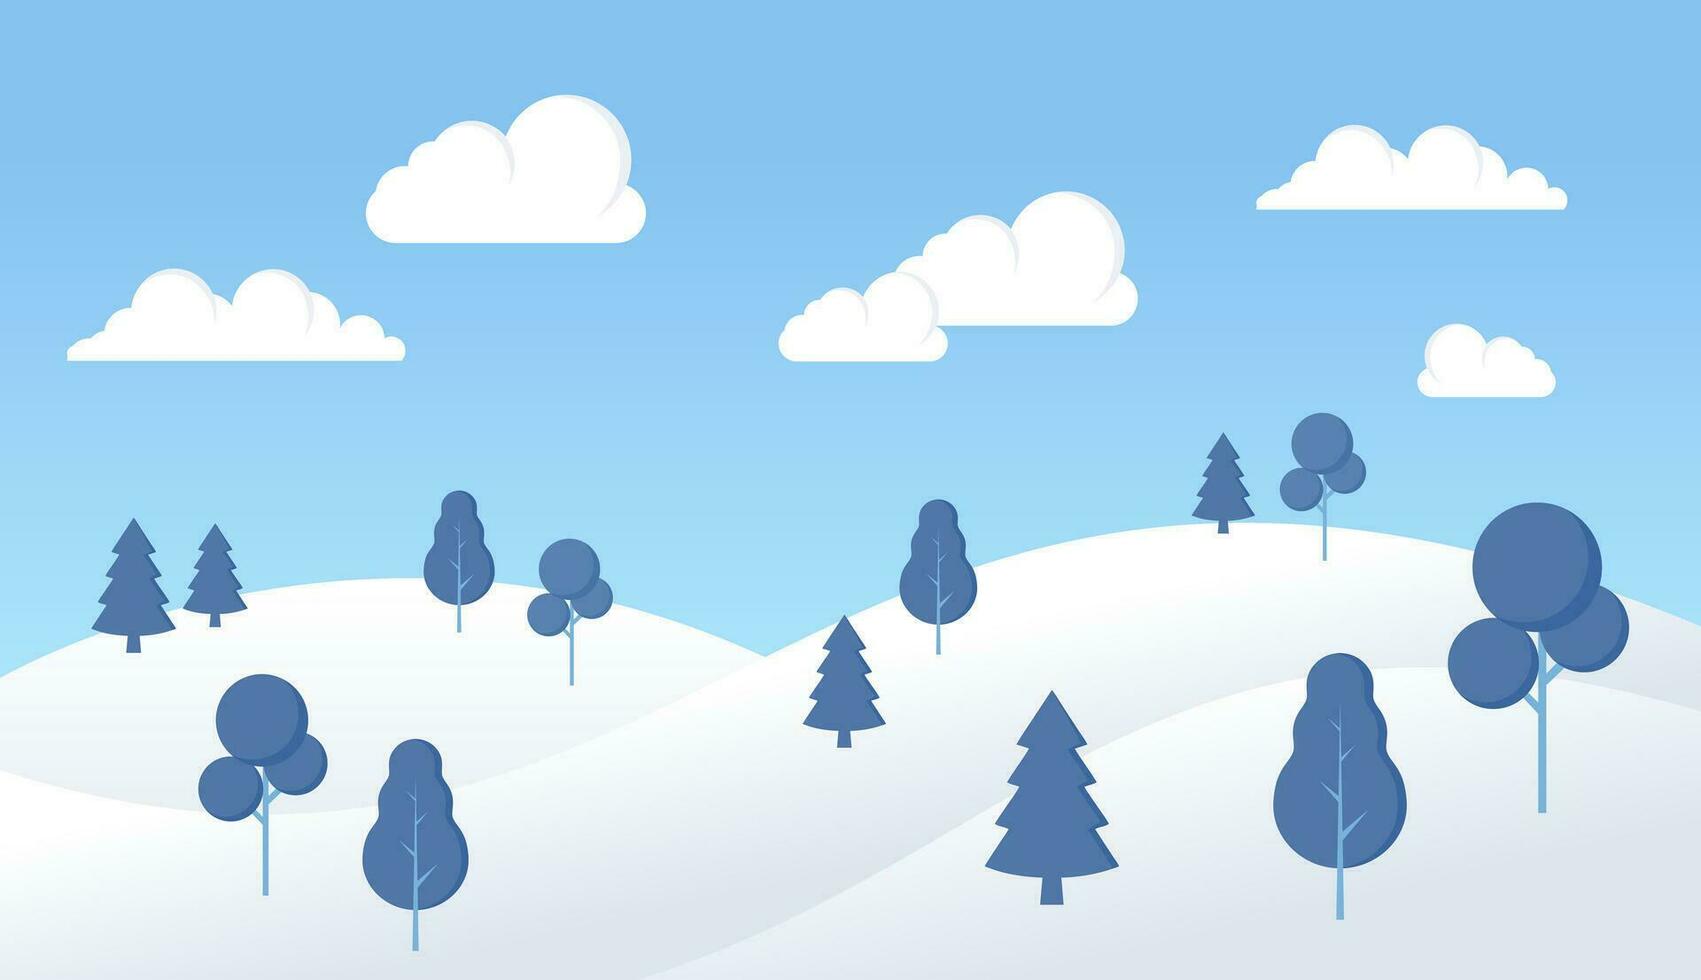 Simple winter landscape illustration, vector background with winter snow theme, flat design style vector illustration of snow hills, clouds and trees